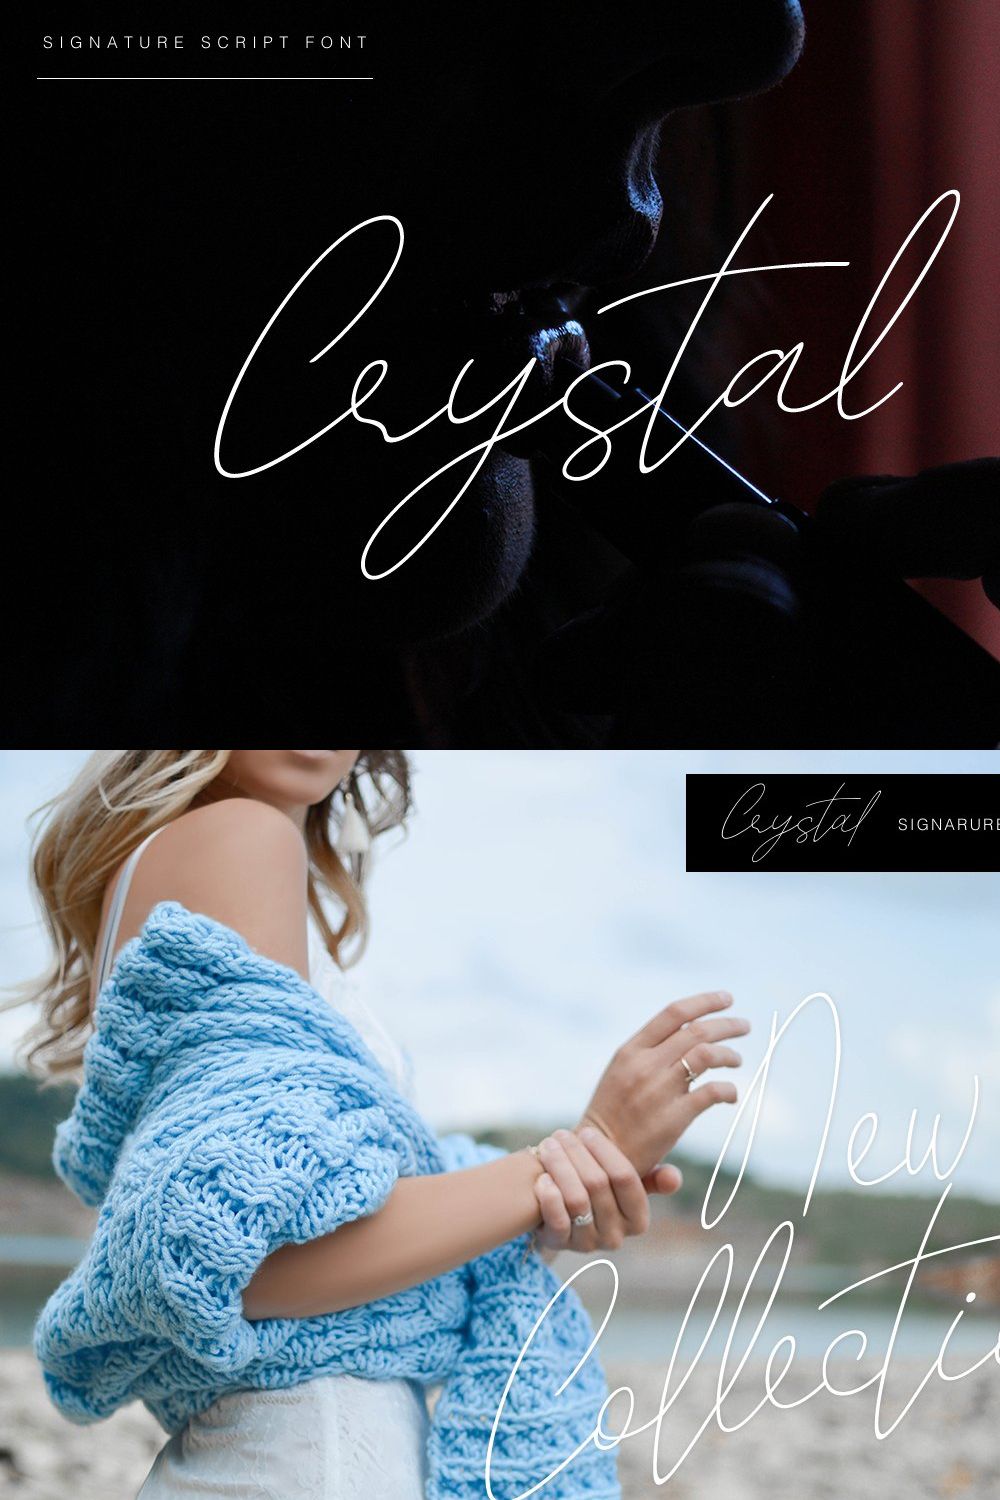 Crystal pinterest preview image.